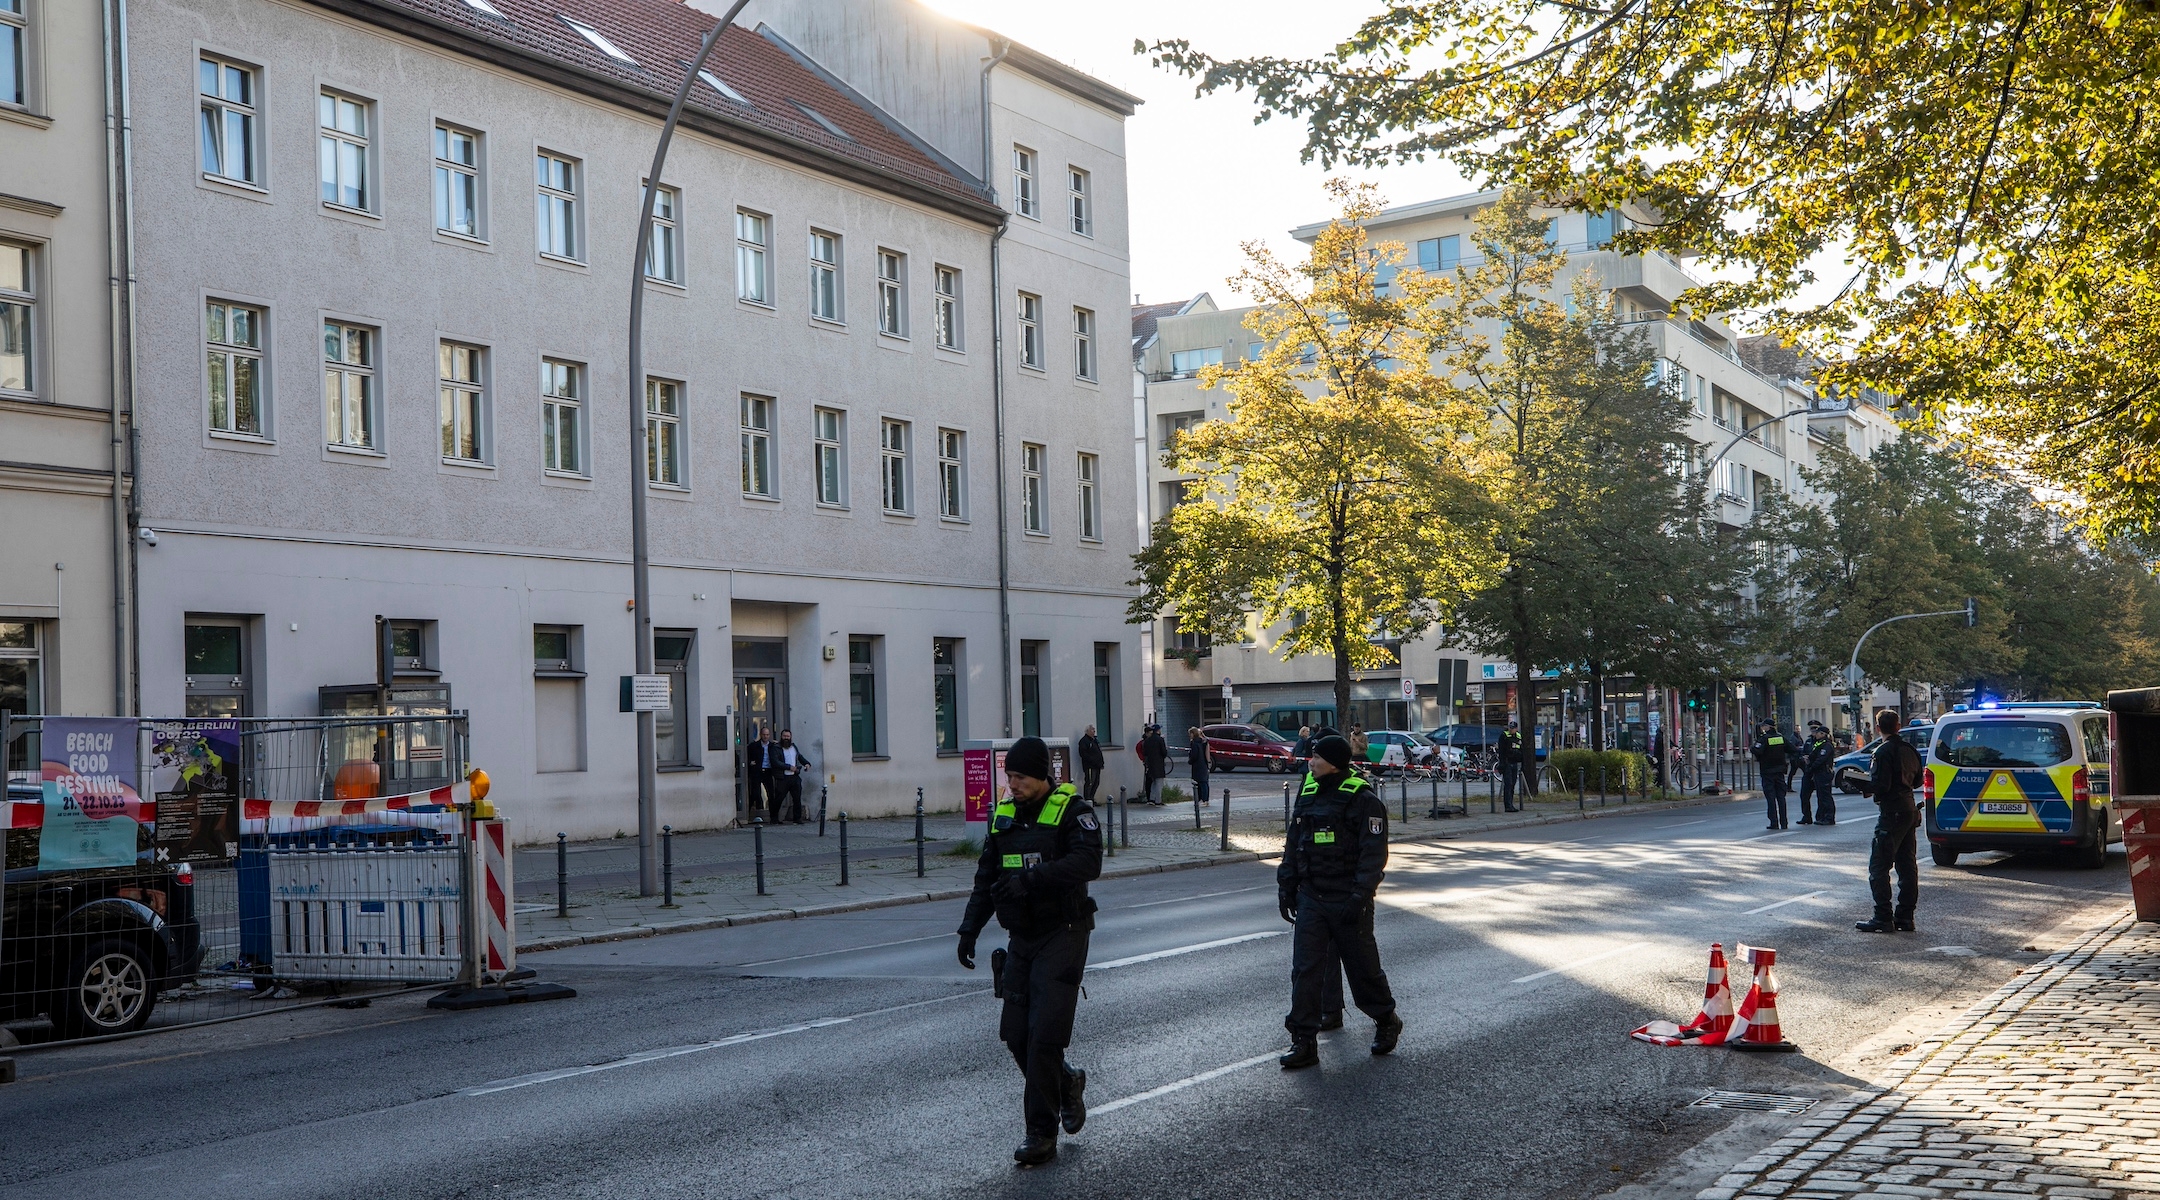 Police walk outside a building that houses a synagogue and school of the Kahal Adass Jisroel Jewish community in Berlin, Oct. 18, 2023. (Maja Hitij/Getty Images)